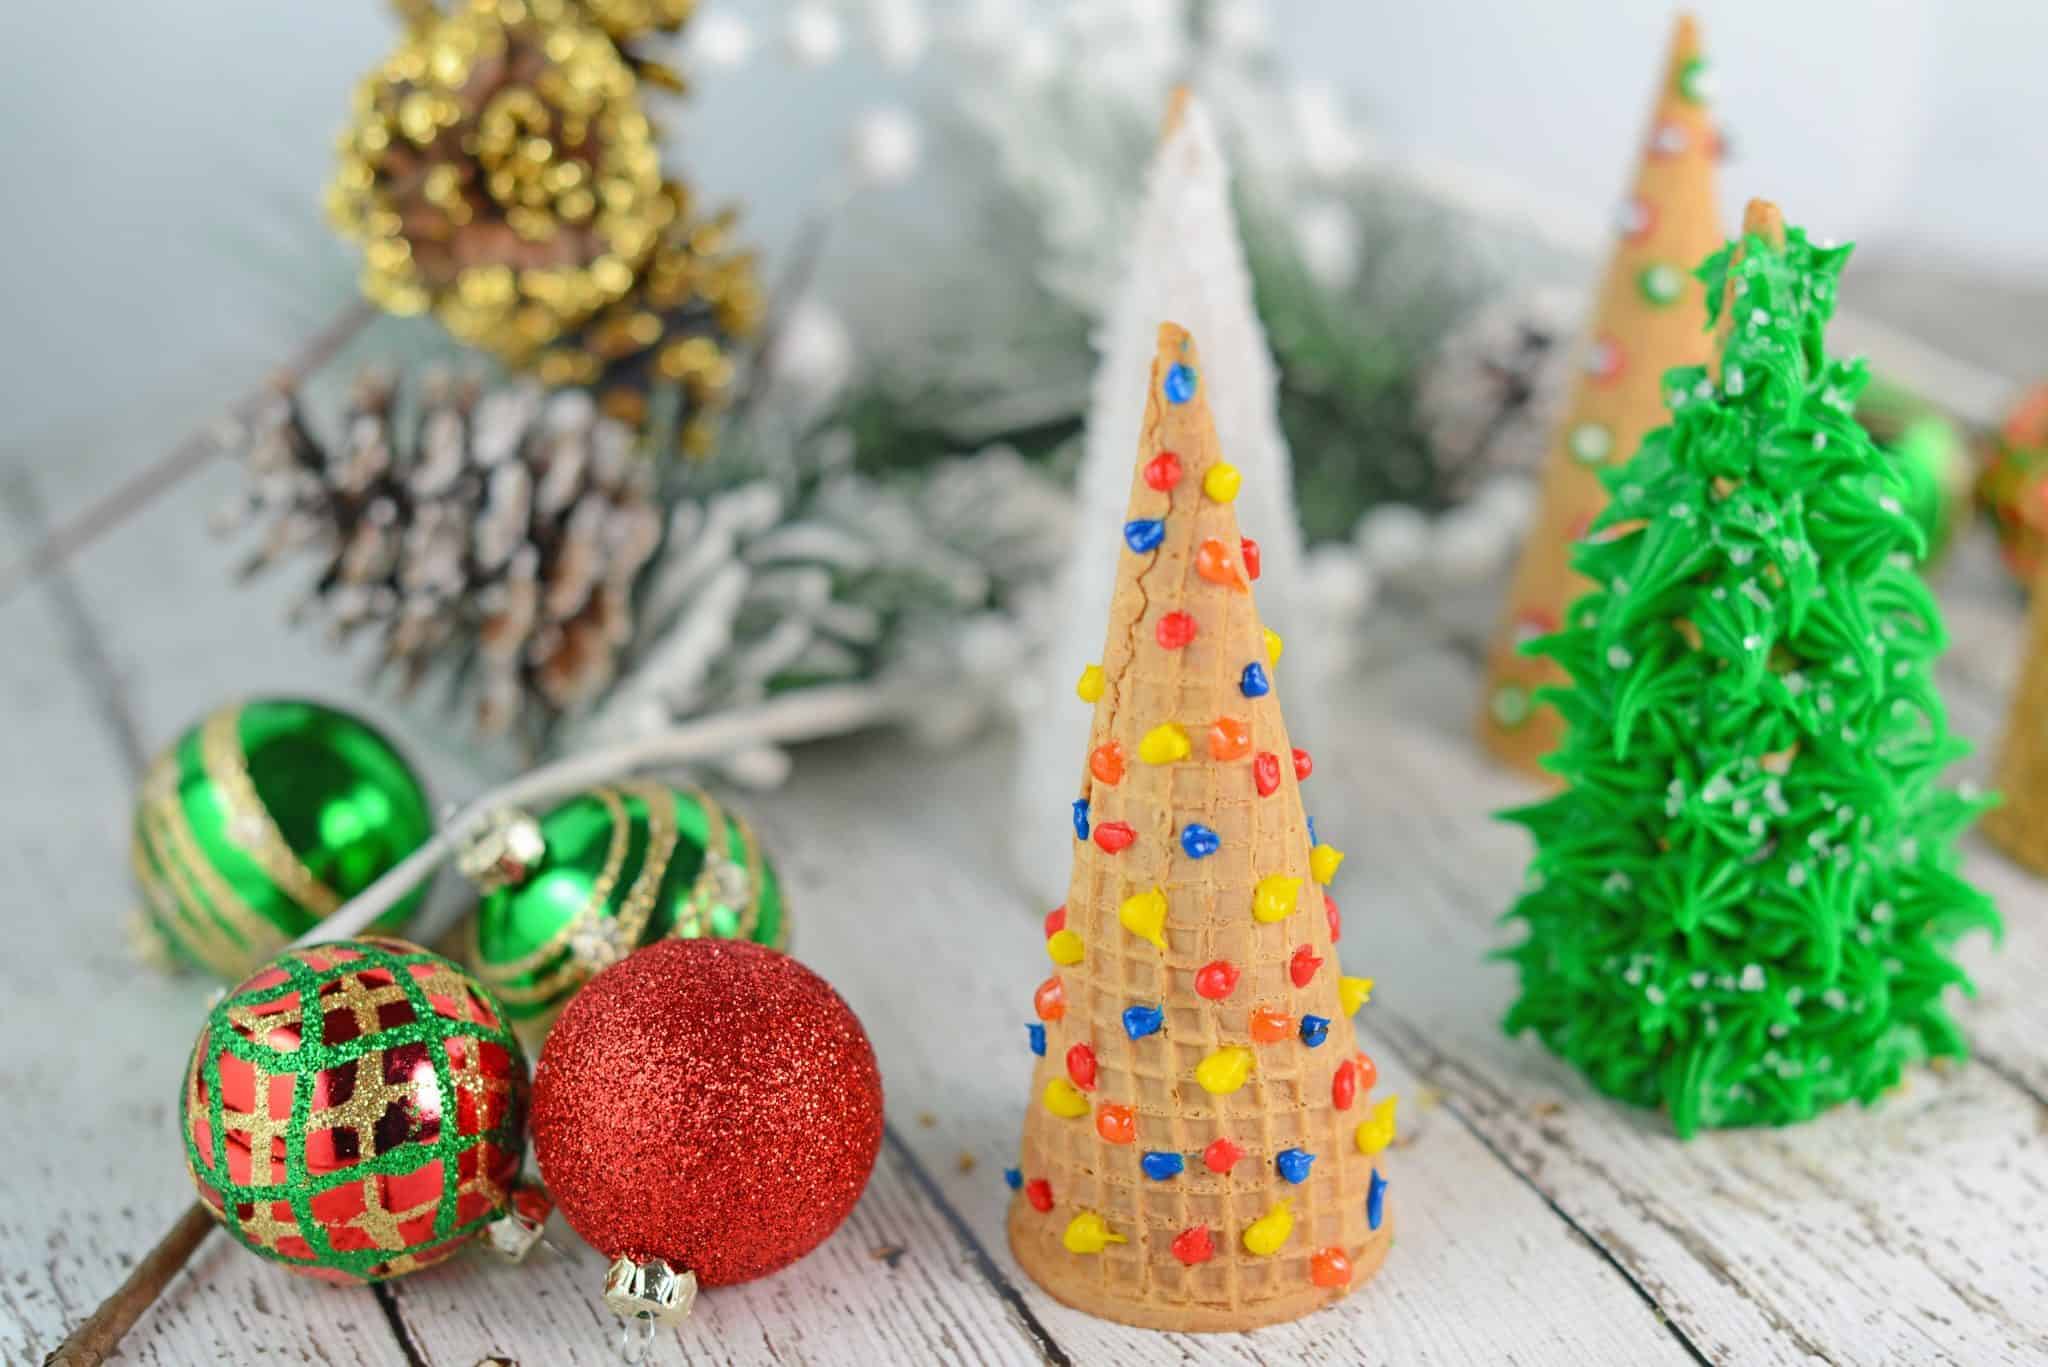 Christmas Tree Cake Cones are filled with cake and frosting and then festively decorated and a fun holiday activity for kids.